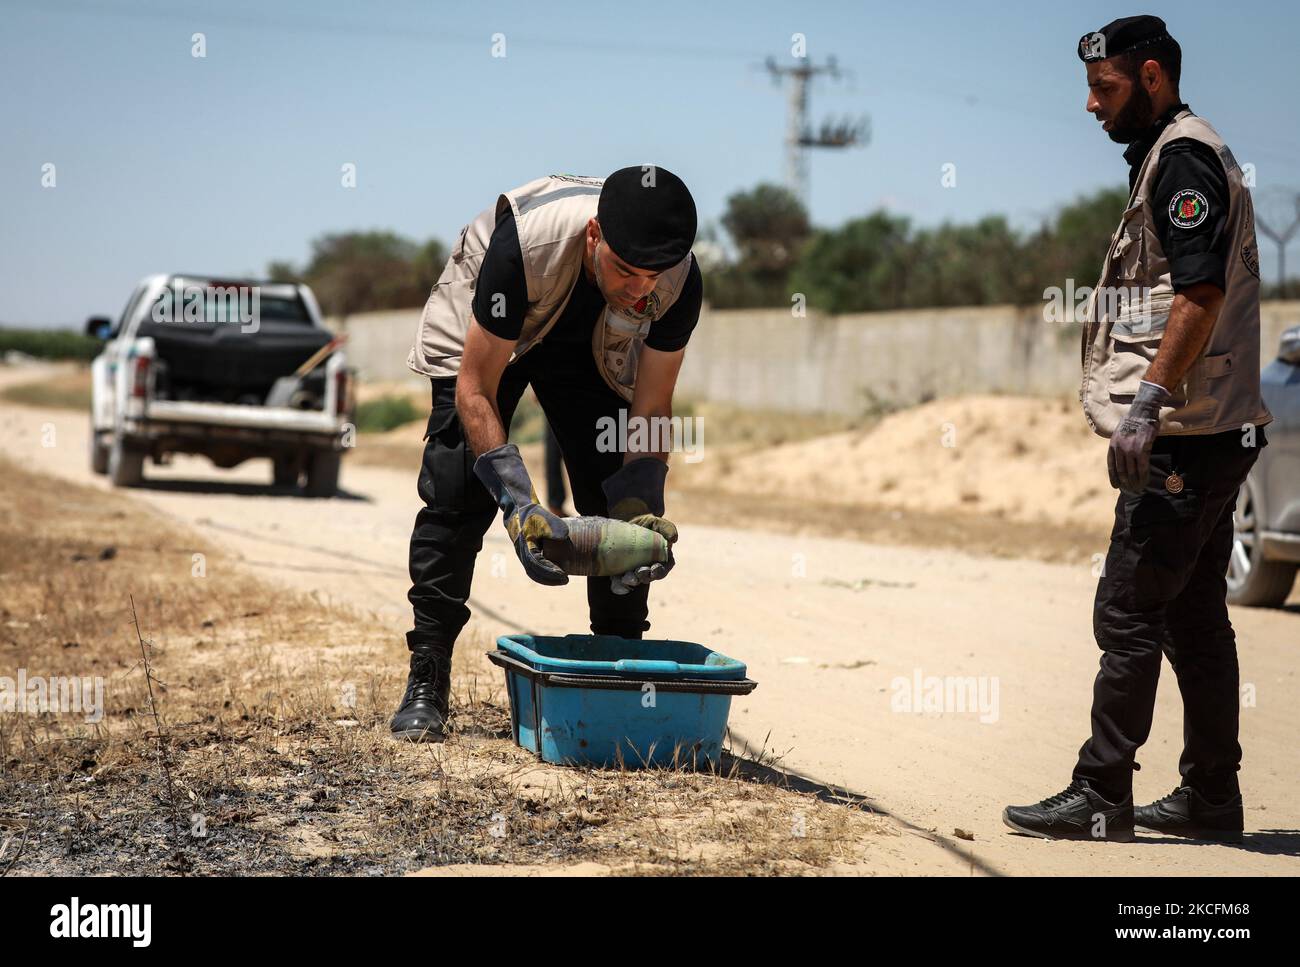 Explosives experts of Hamas stow away in the back of a vehicle a collected unexploded projectile from the aftermath of the May 2021 conflict with Israel, in Khan Yunis in the southern Gaza Strip on June 5, 2021. (Photo by Majdi Fathi/NurPhoto) Stock Photo